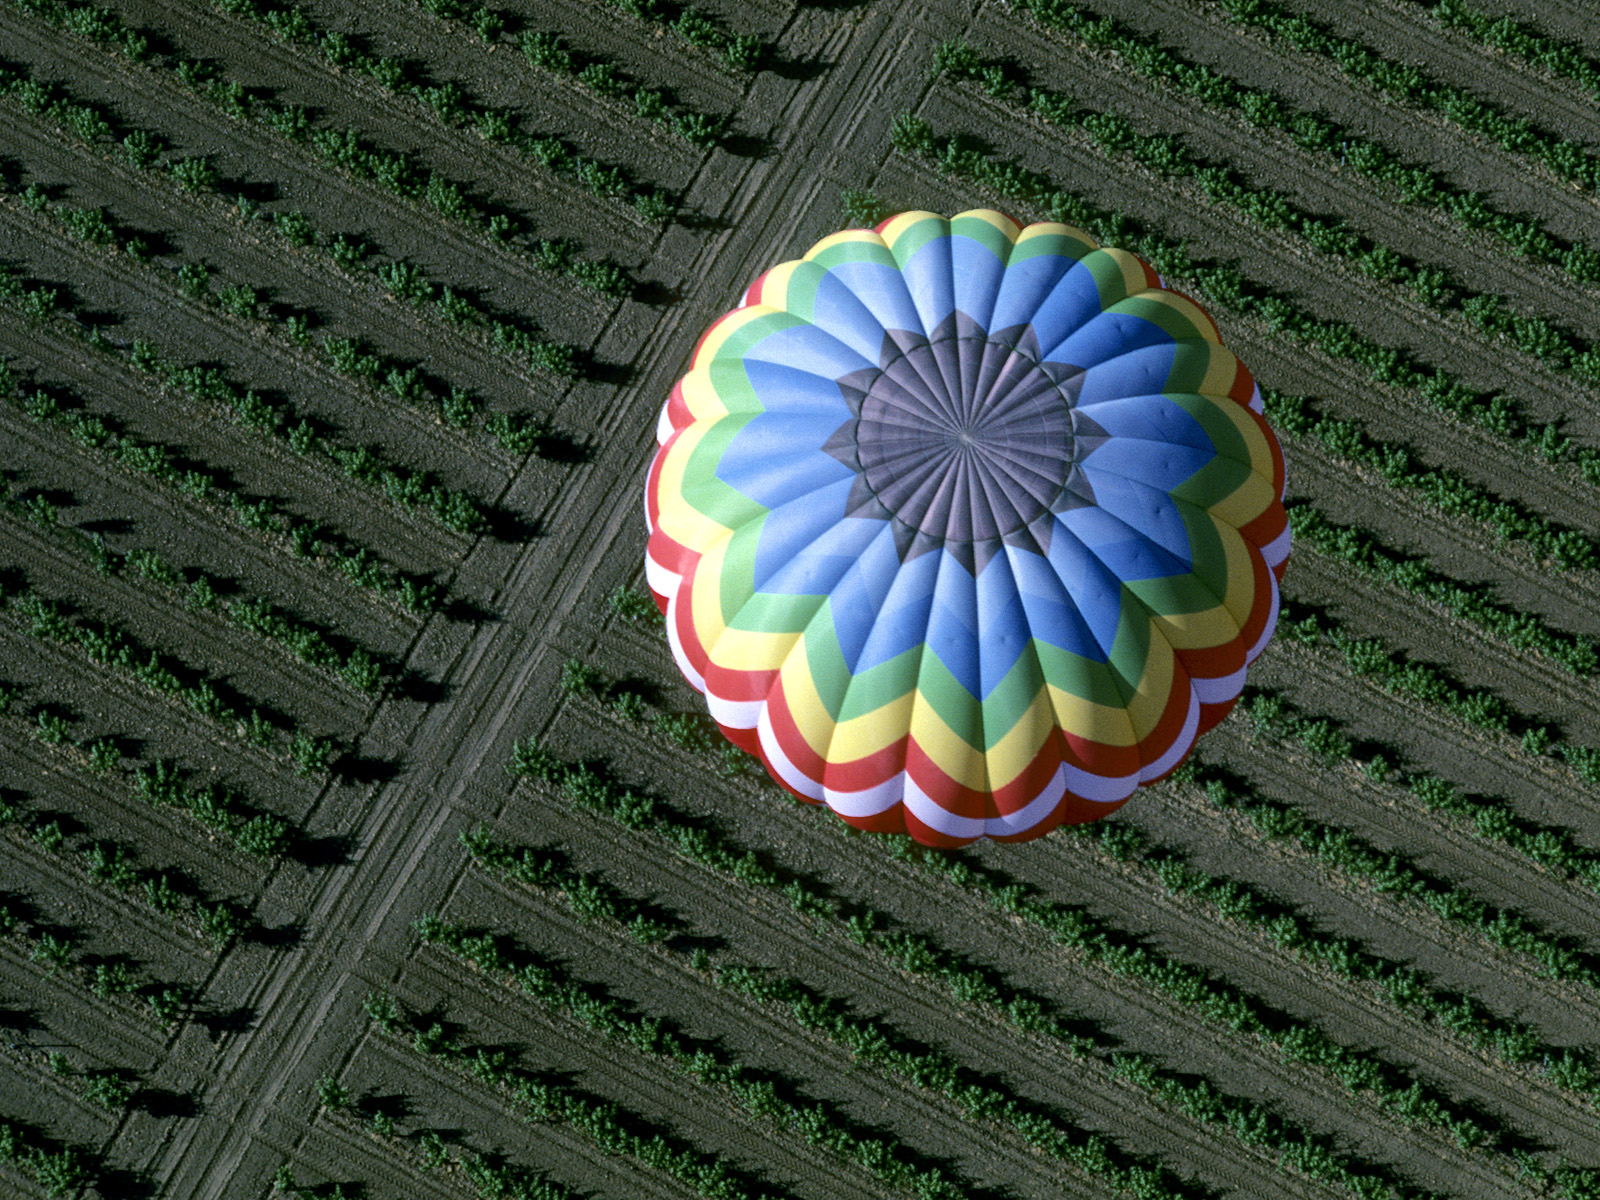 Floating over. Макушка земли. Air Balloons from above. Hot Air Balloon Top view.